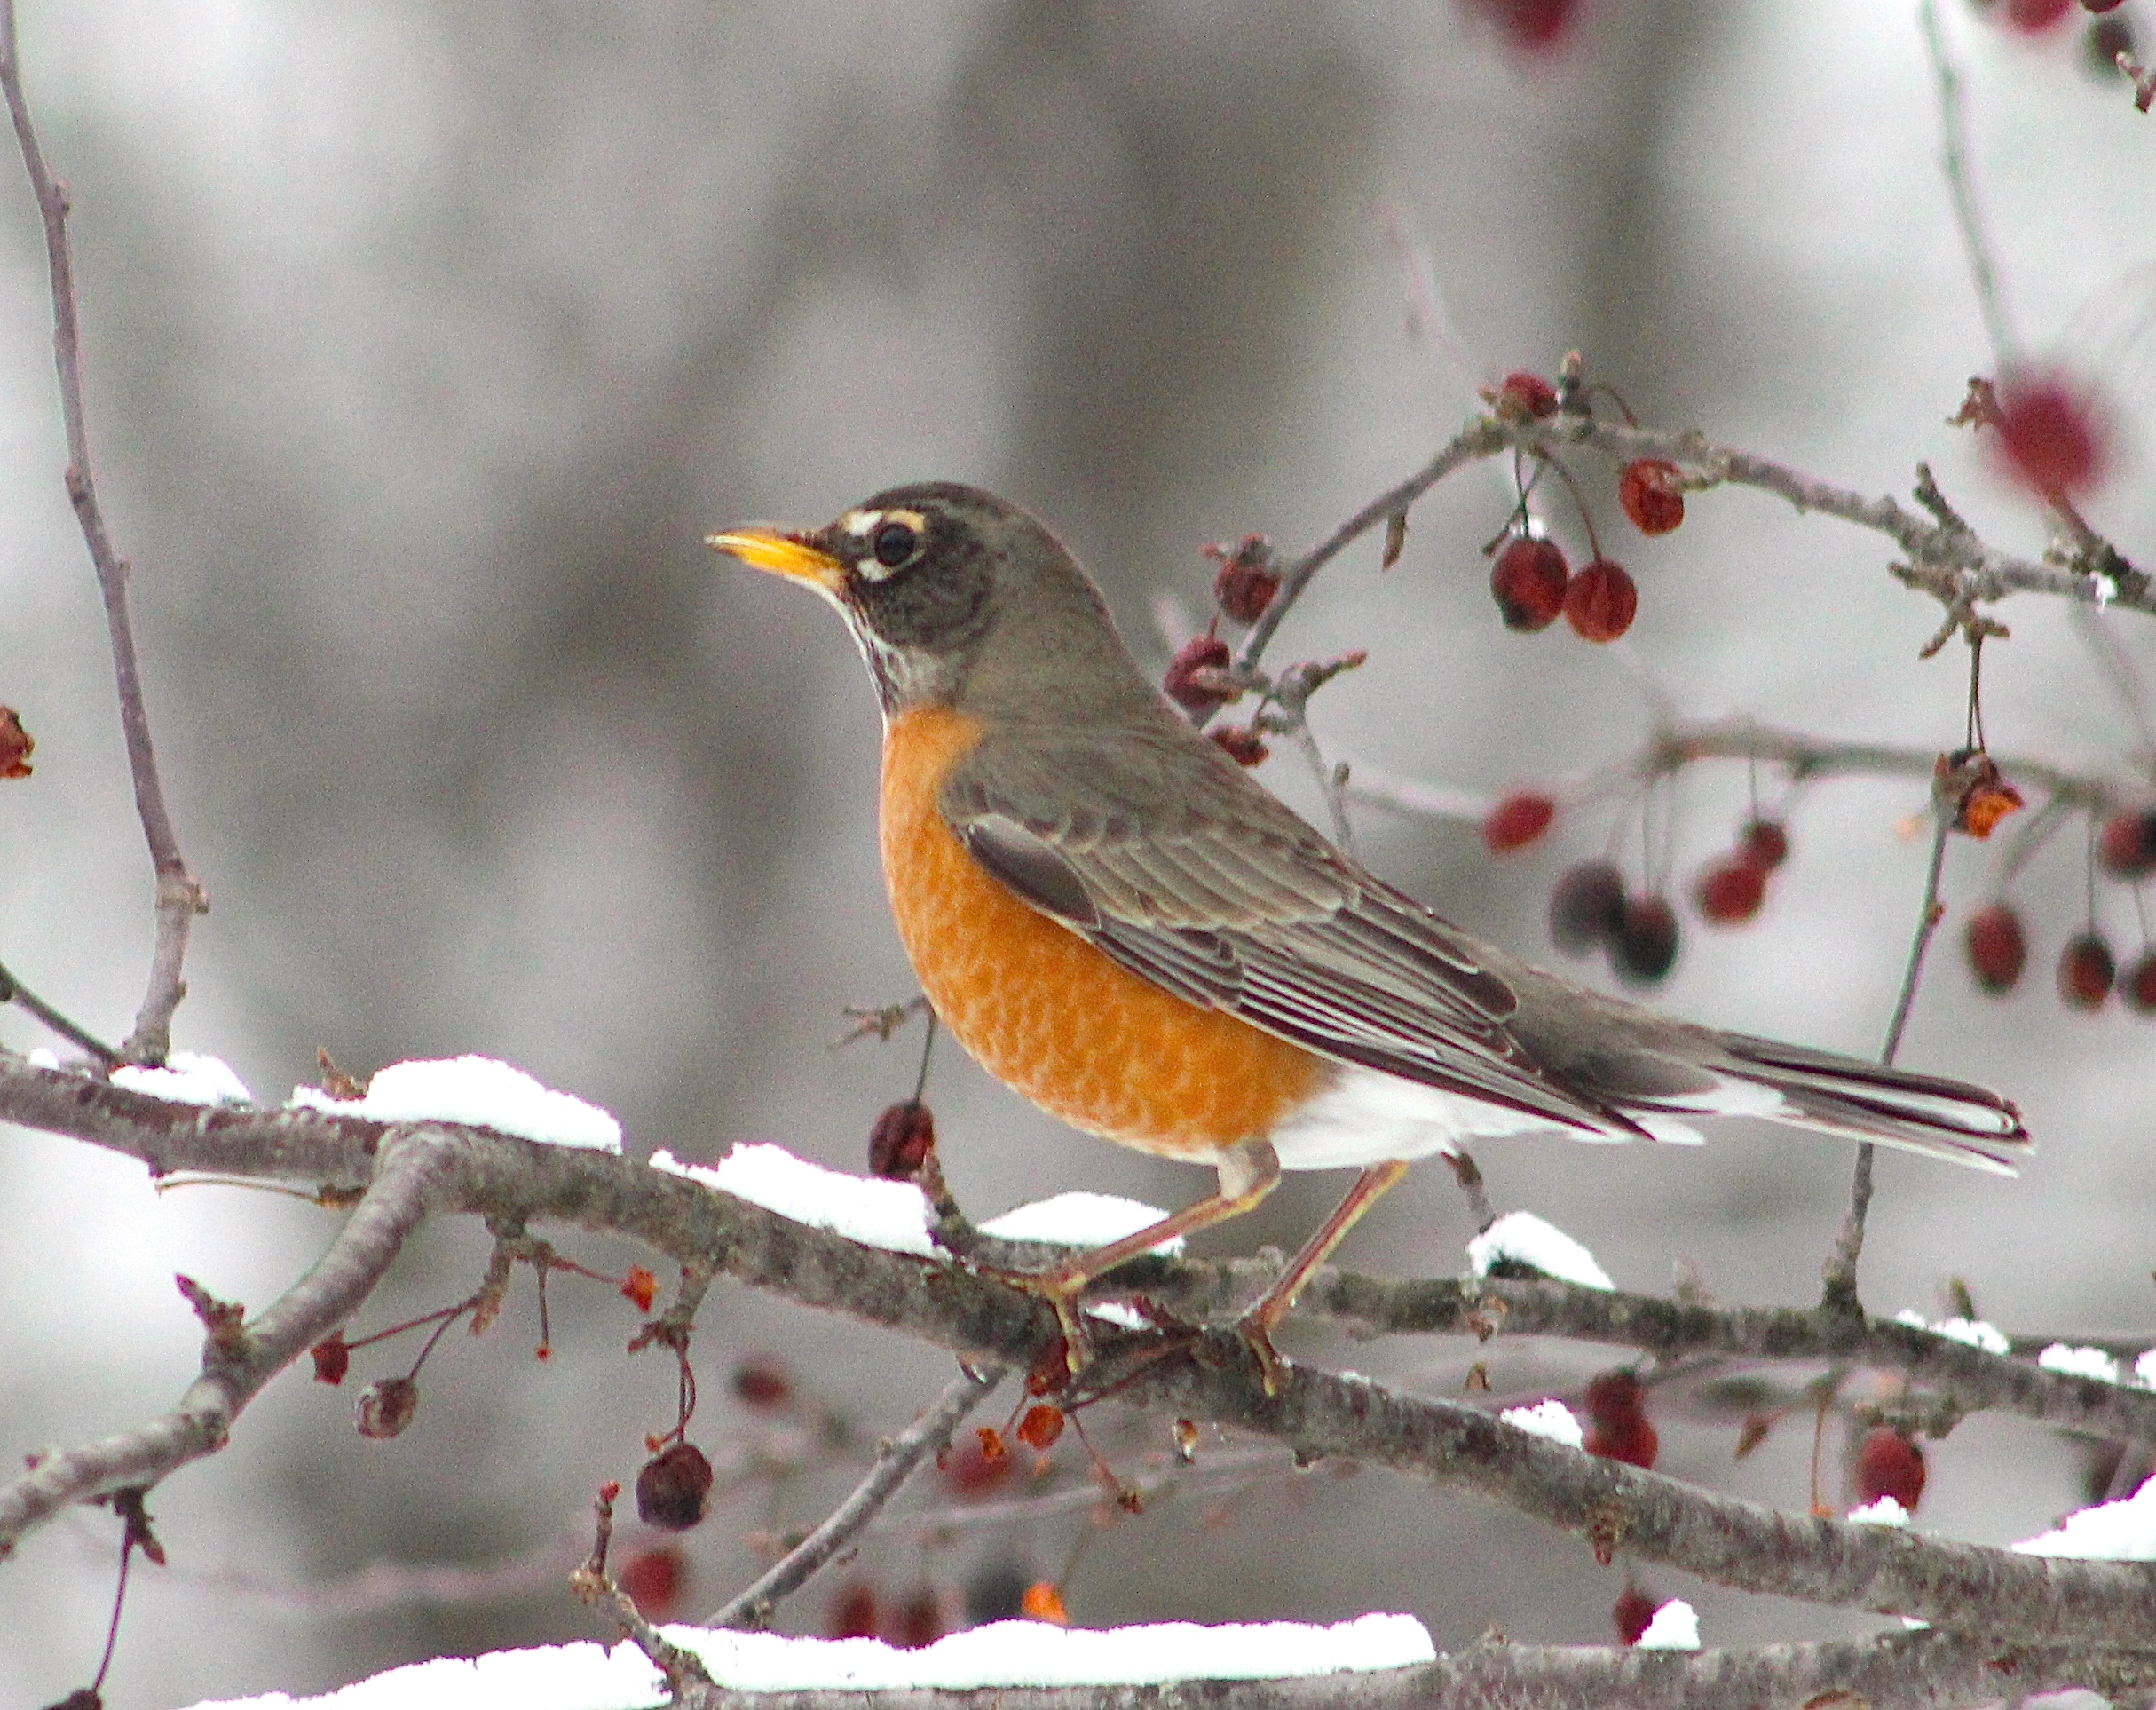 an American robin on a branch with red berries and branches